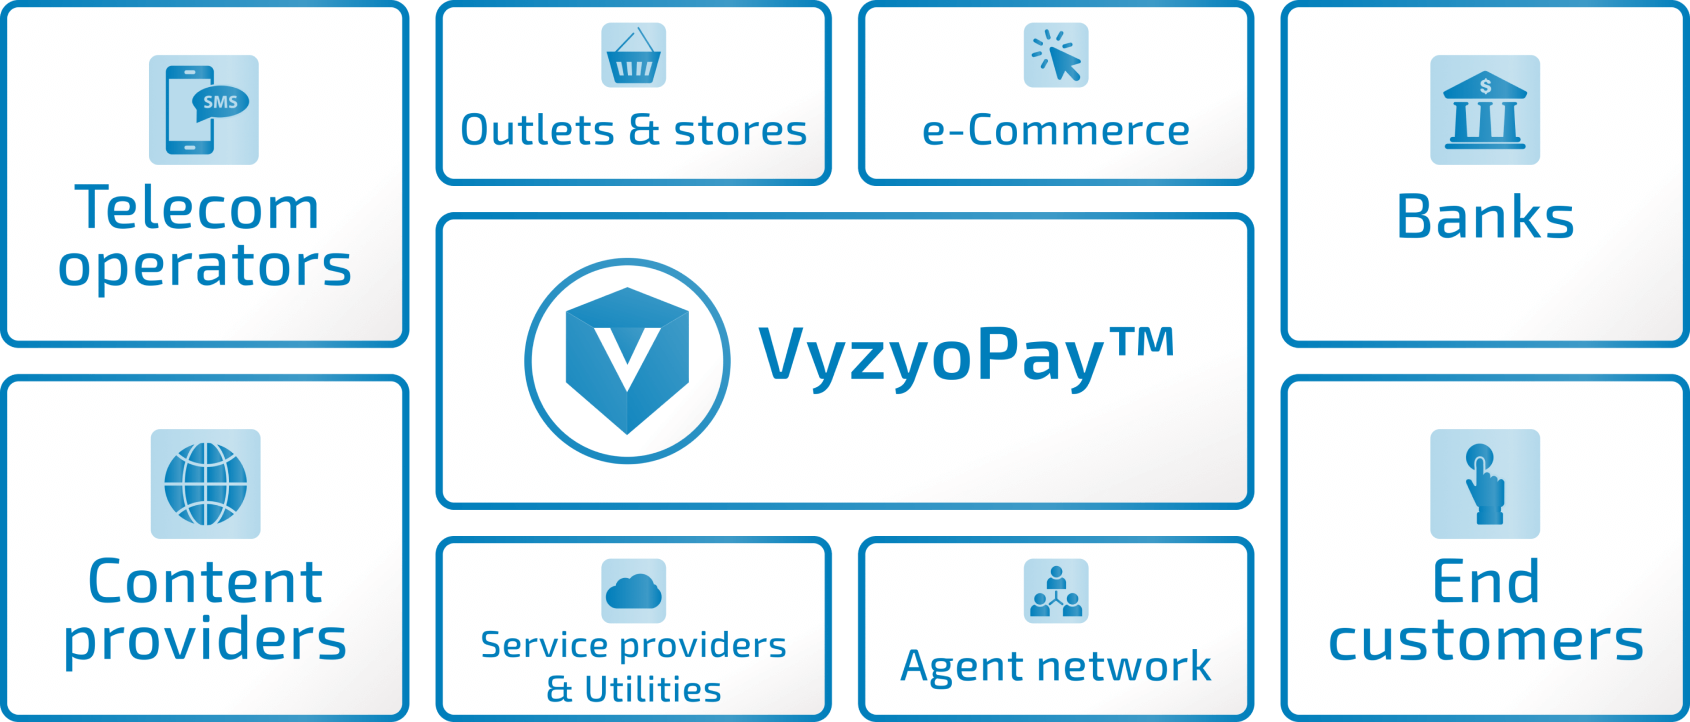 VYZYOPay™ is the Hub of the Mobile Financial Services Ecosystem